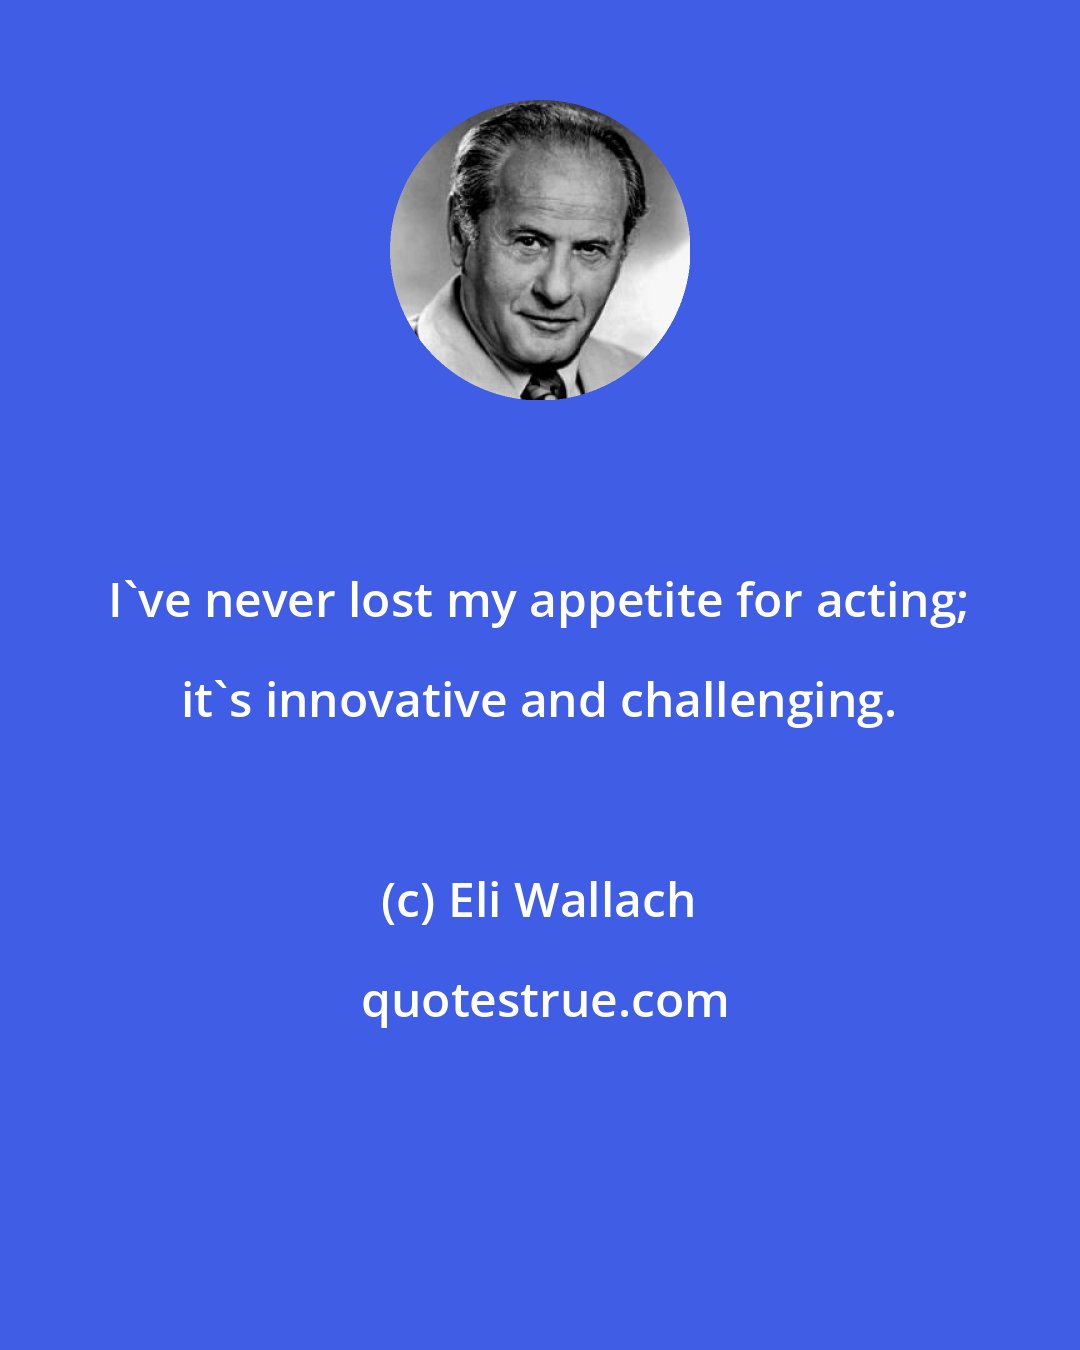 Eli Wallach: I've never lost my appetite for acting; it's innovative and challenging.